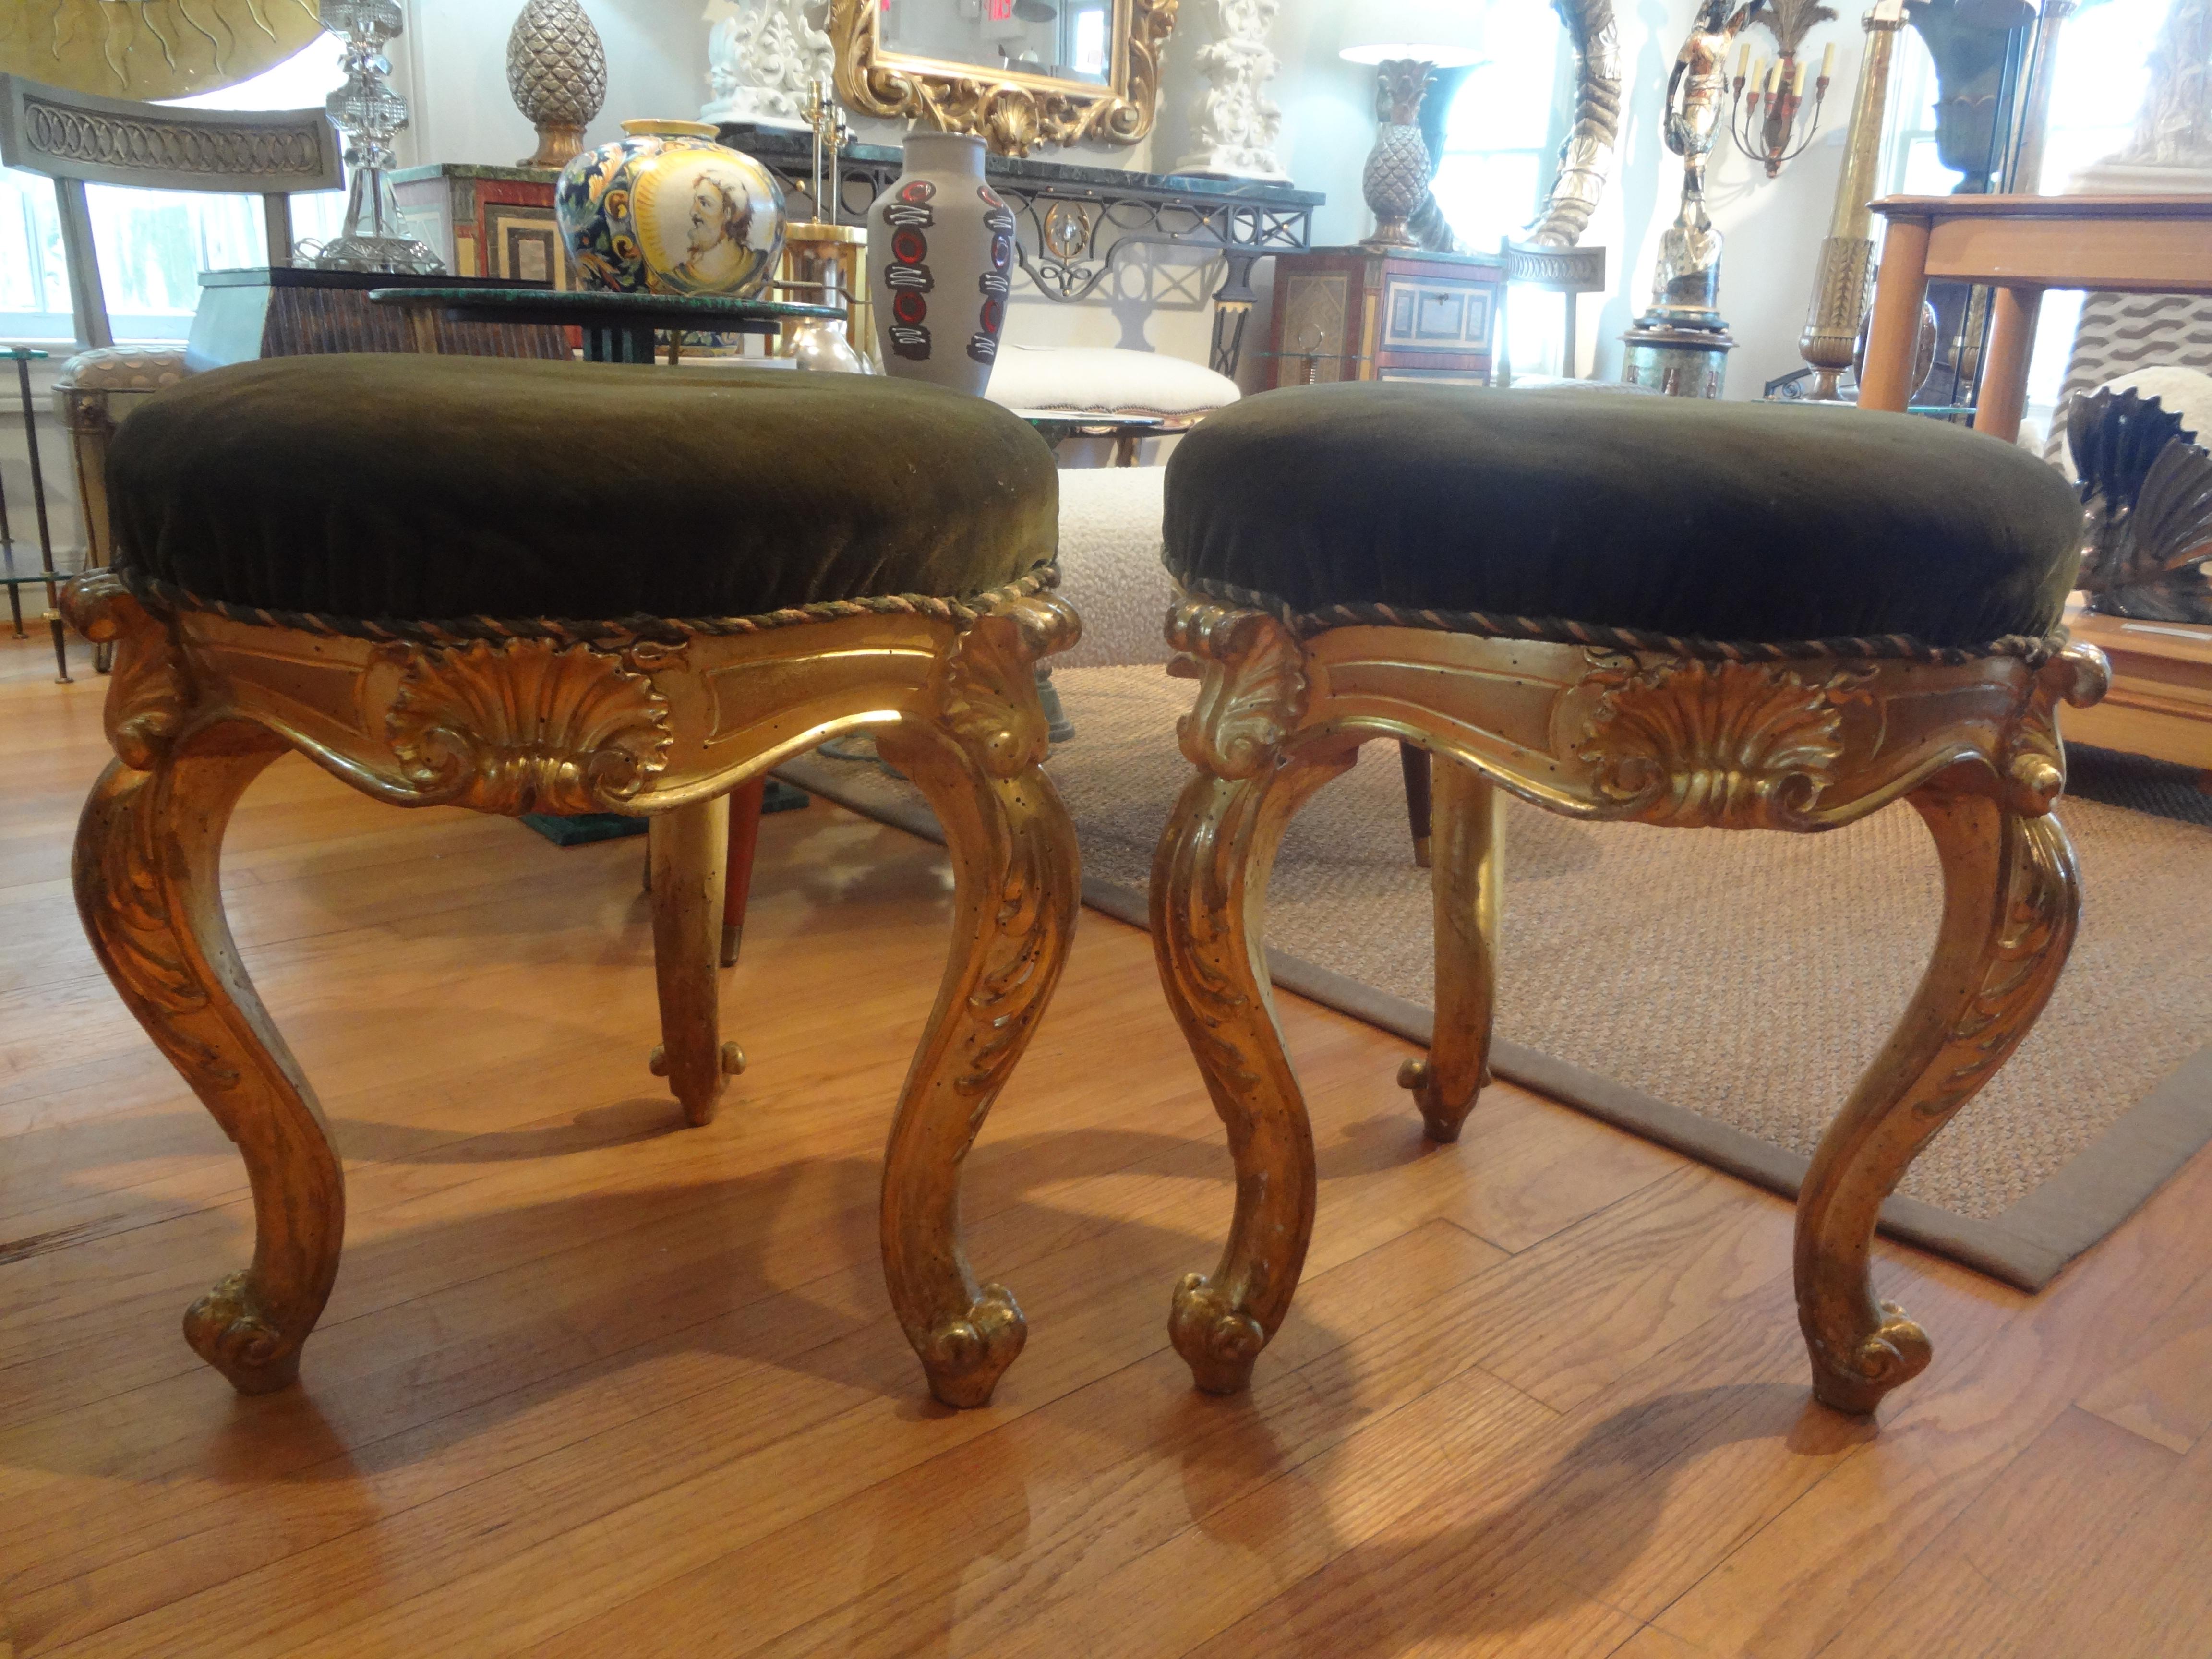 Pair of 19th century Italian Regence style Giltwood ottomans.
We offer a pair of antique Italian Régence style three legged round gilt wood ottomans, poufs, stools or benches with beautifully carved shell detail terminating in cabriole legs.
This